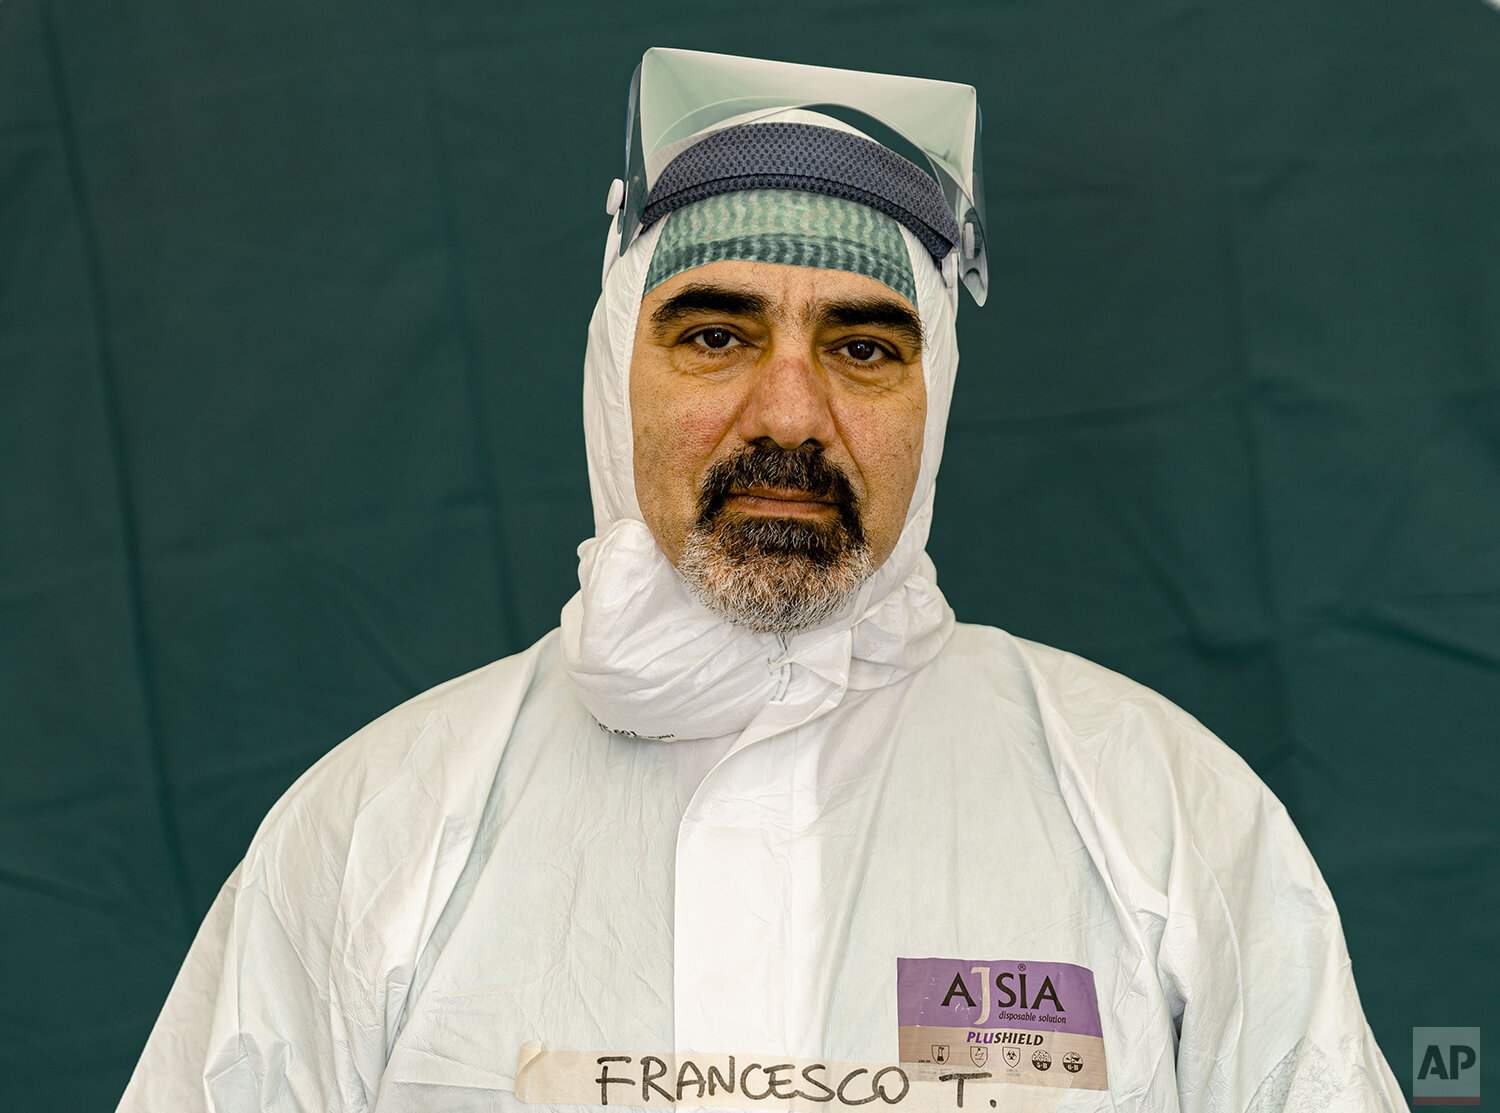  Francesco Tarantini, 54, a nurse at the emergency structures that were set up to ease procedures for the arrival of Covid-19 patients, poses for a portrait at the Brescia Spedali Civili Hospital, in Brescia, Italy Friday, March 27, 2020. (AP Photo/L